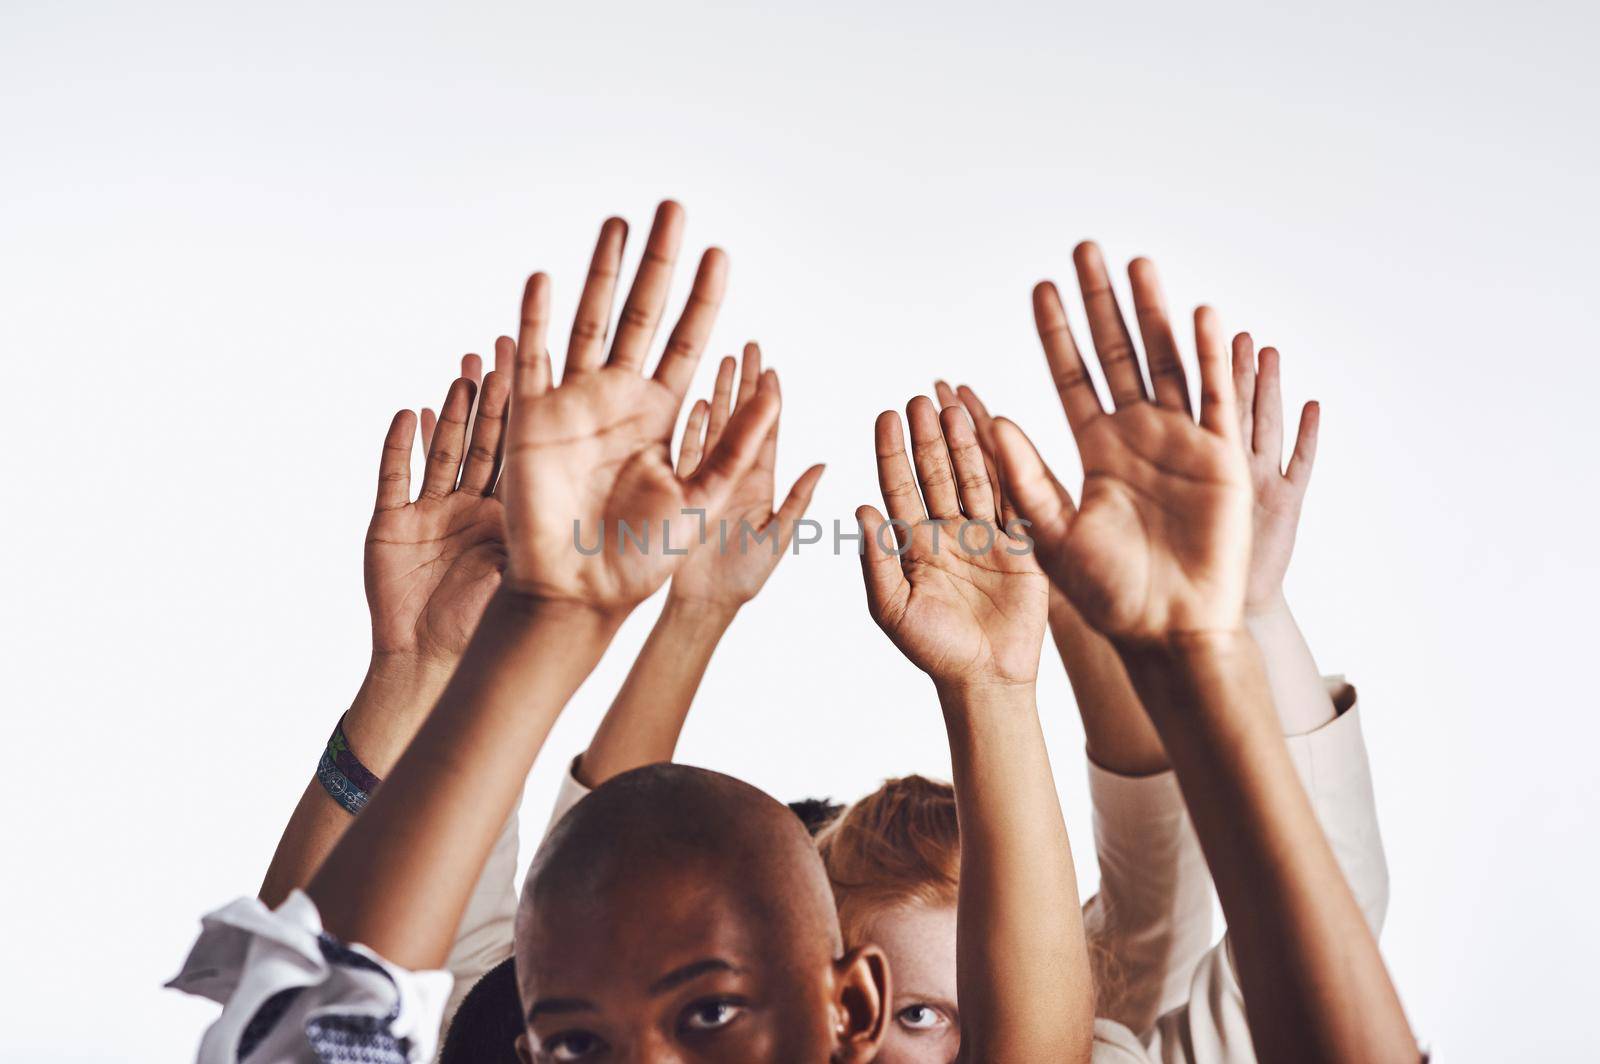 Sometimes you just have to accept your failure. a group of hands reaching up against a white background